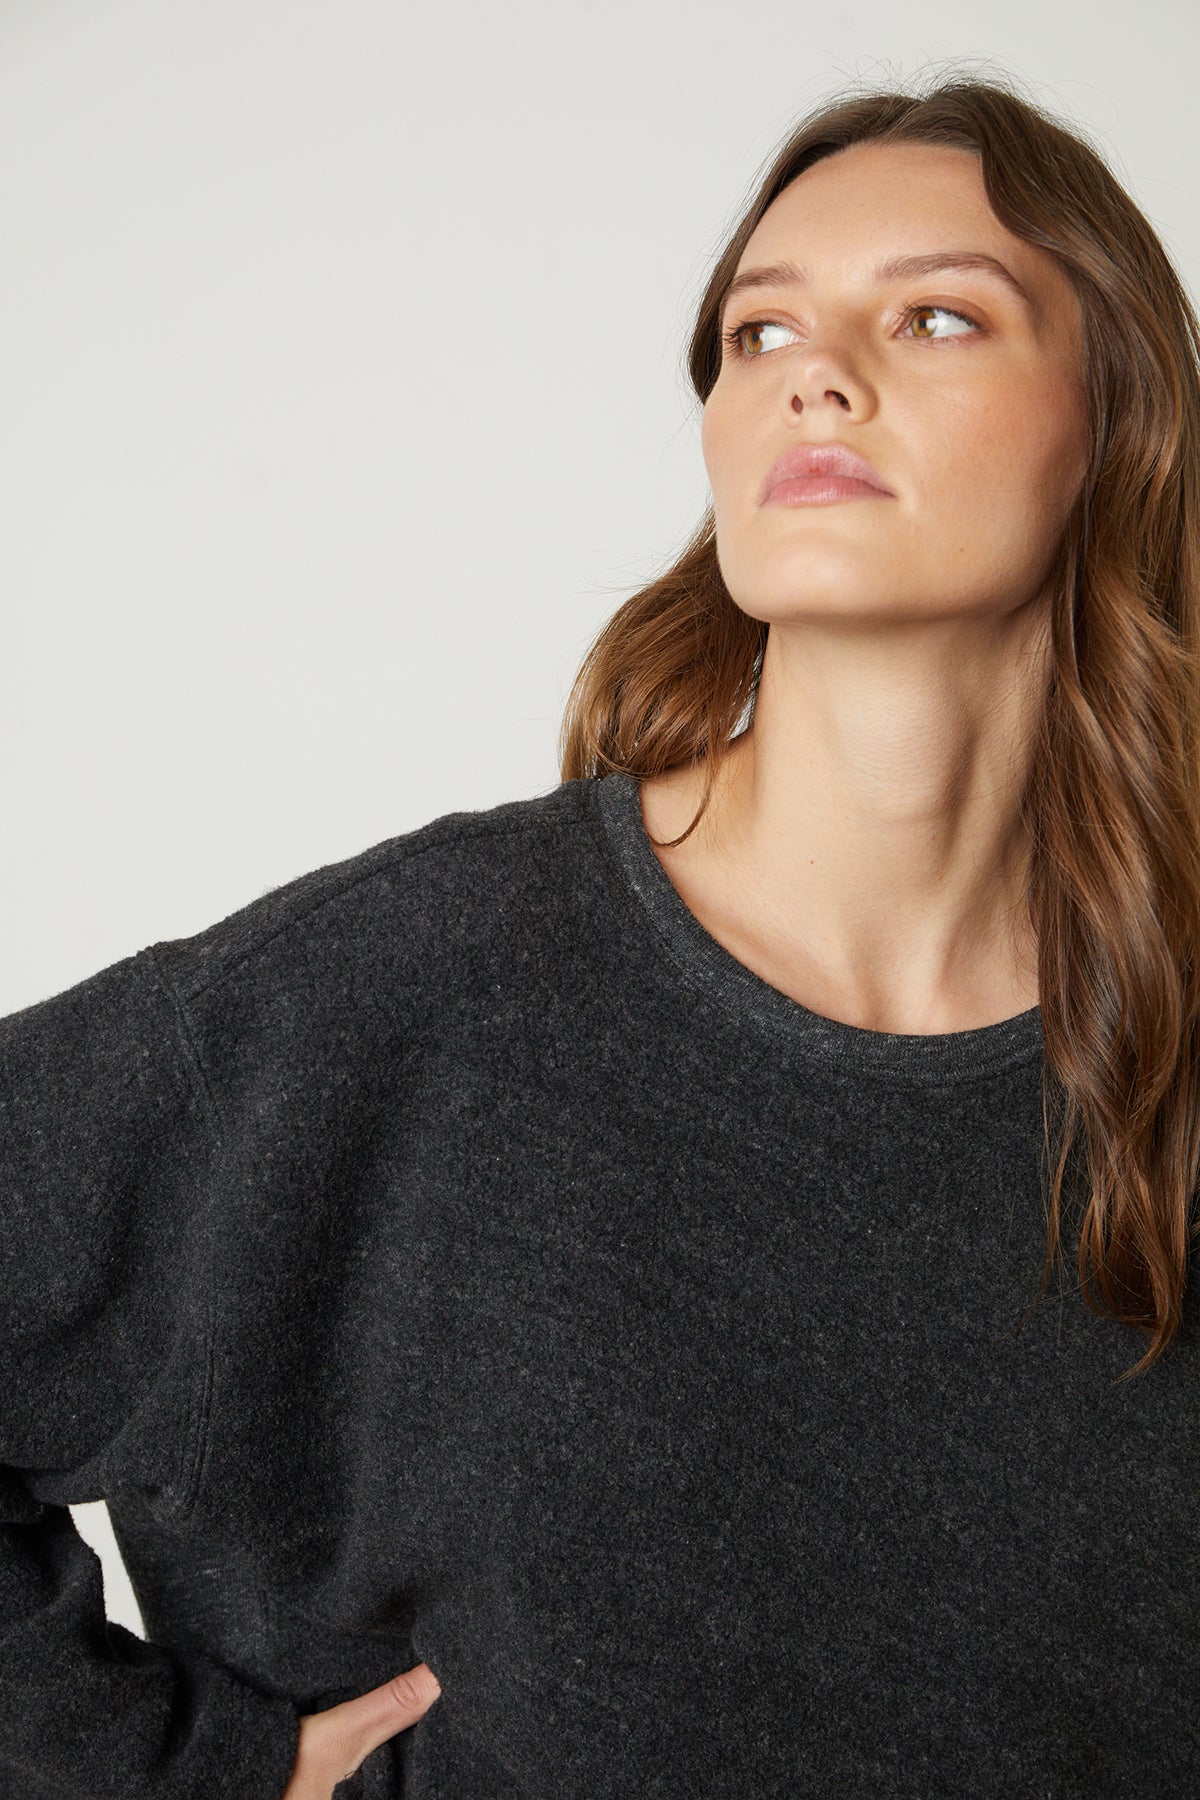 The model is wearing a black Arissa Cropped Sweatshirt by Velvet by Graham & Spencer with long sleeves.-25745169383617